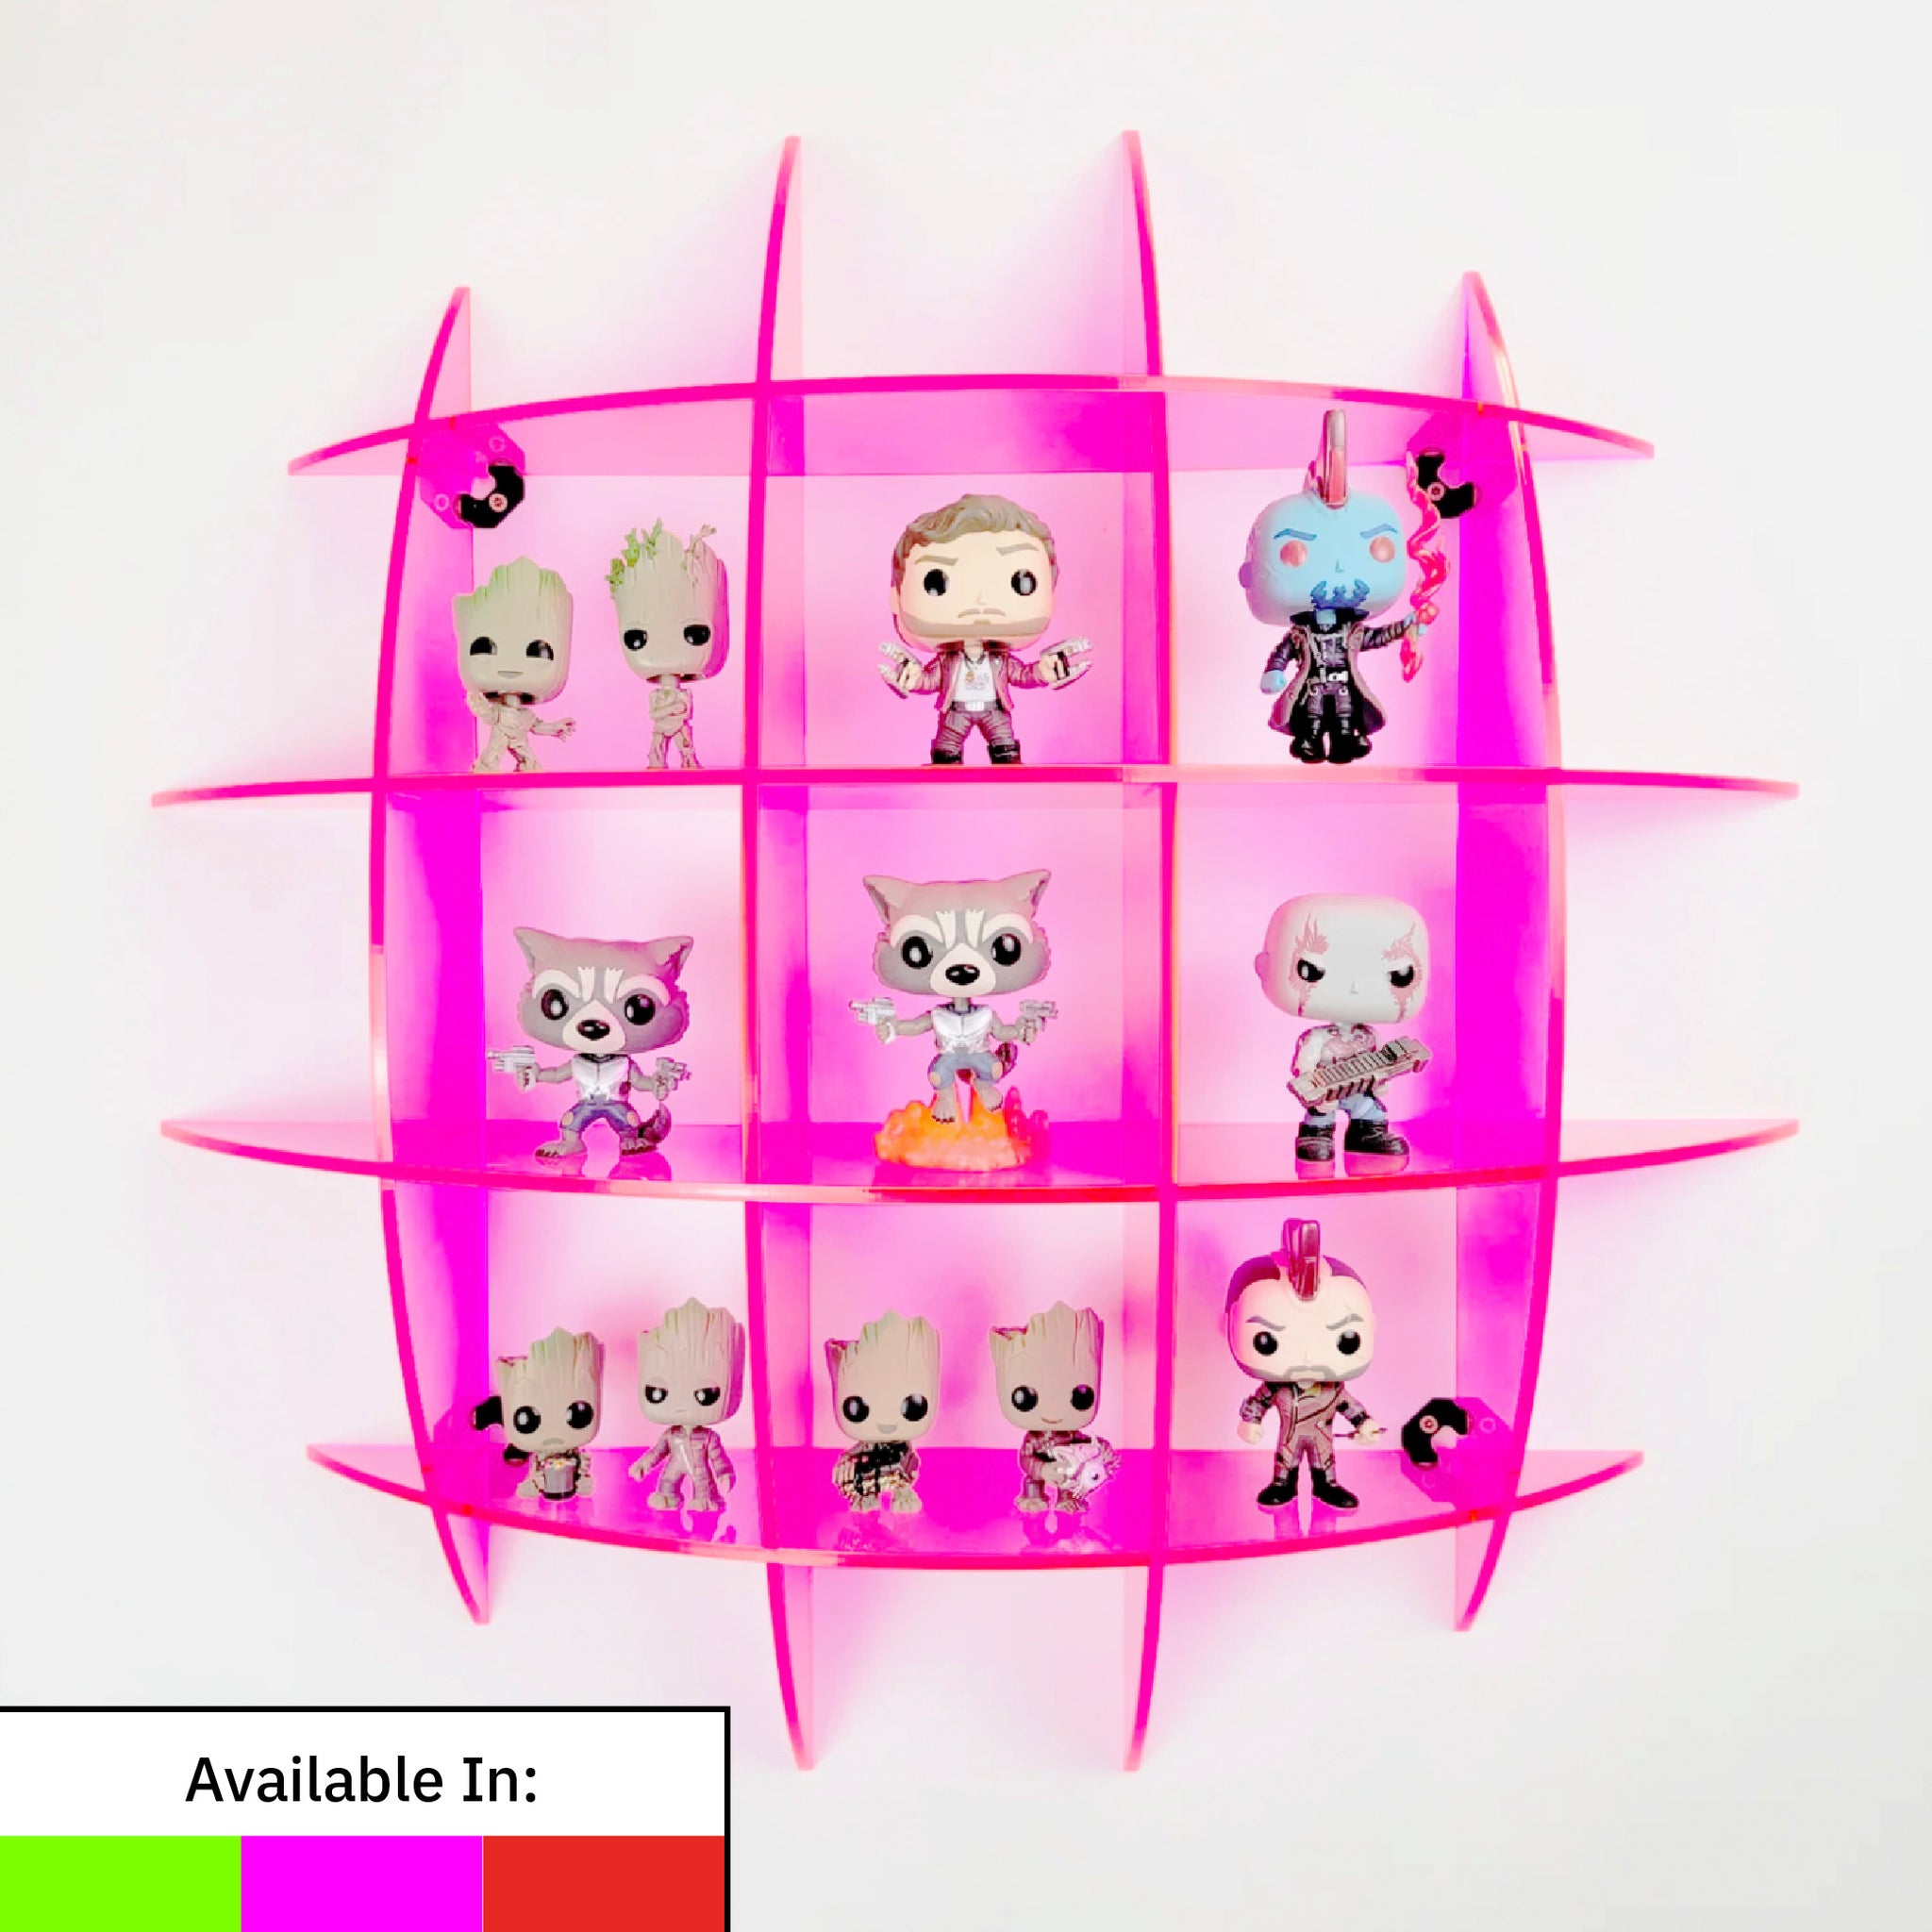 Neon/Fluorescent Colored Spherical Wall Mounted Shelving